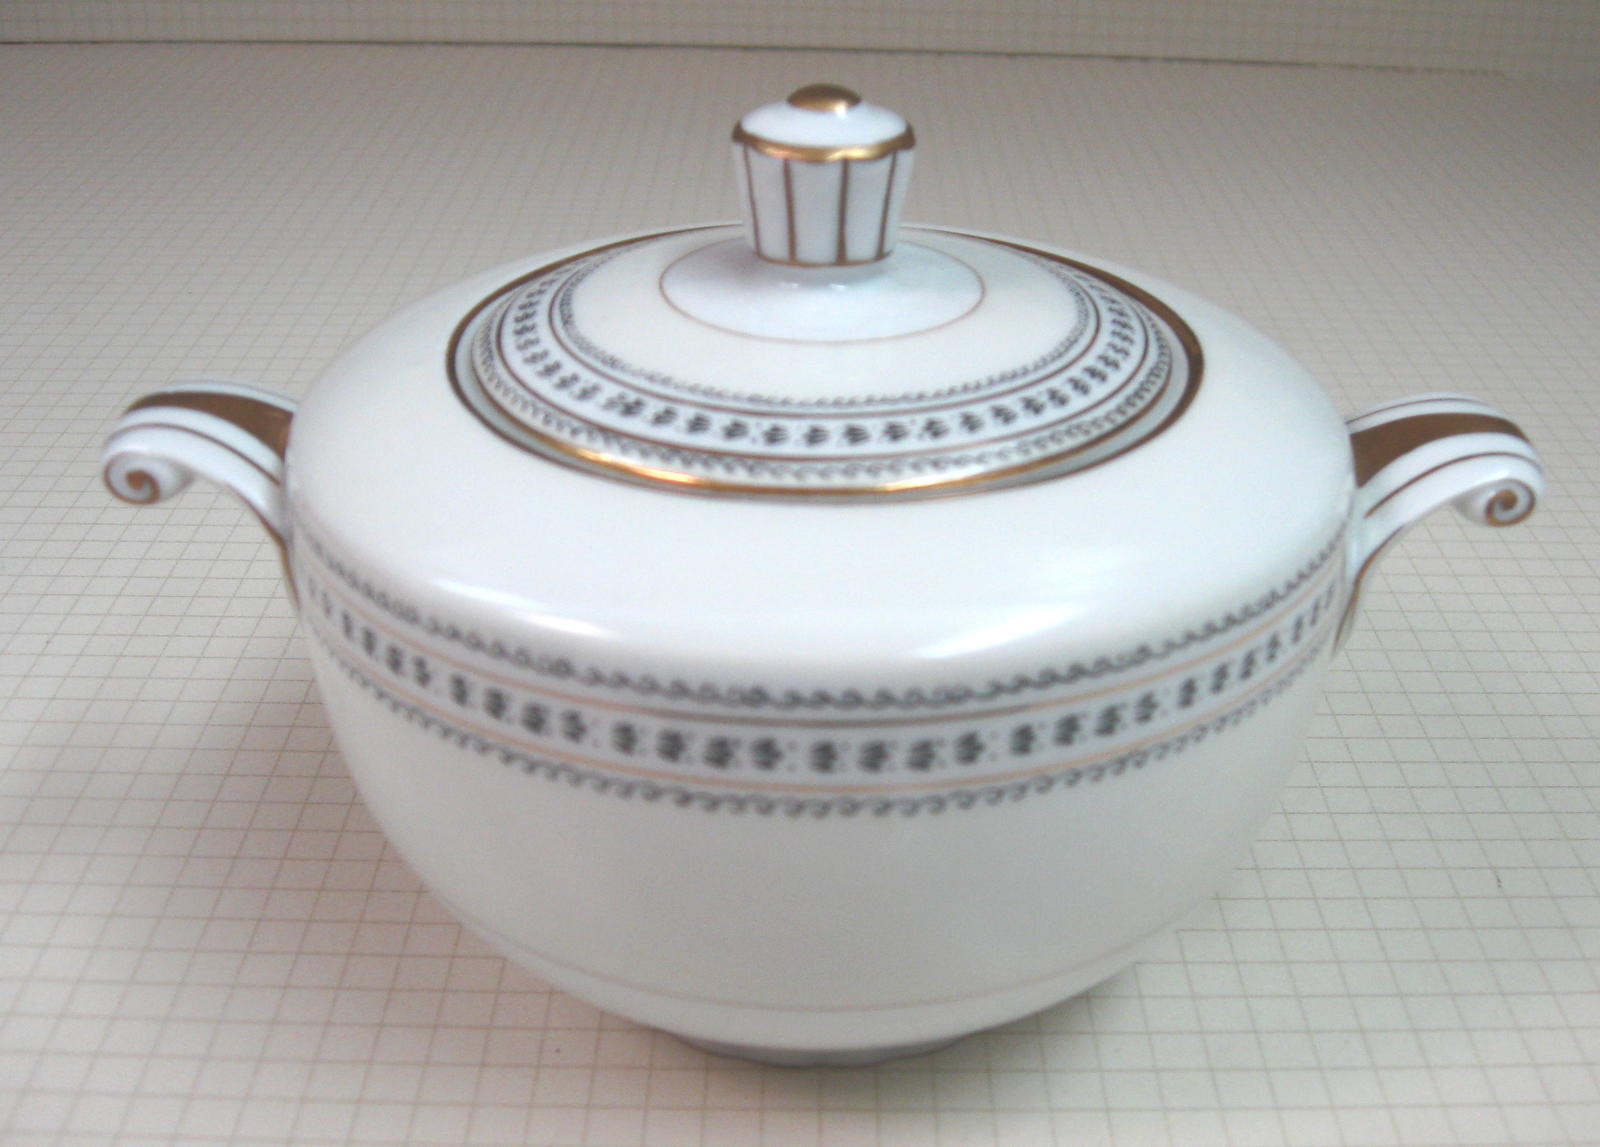 Primary image for Narumi Covered Sugar Bowl Laurel Pattern, Discontinued Pattern, Occupied Japan